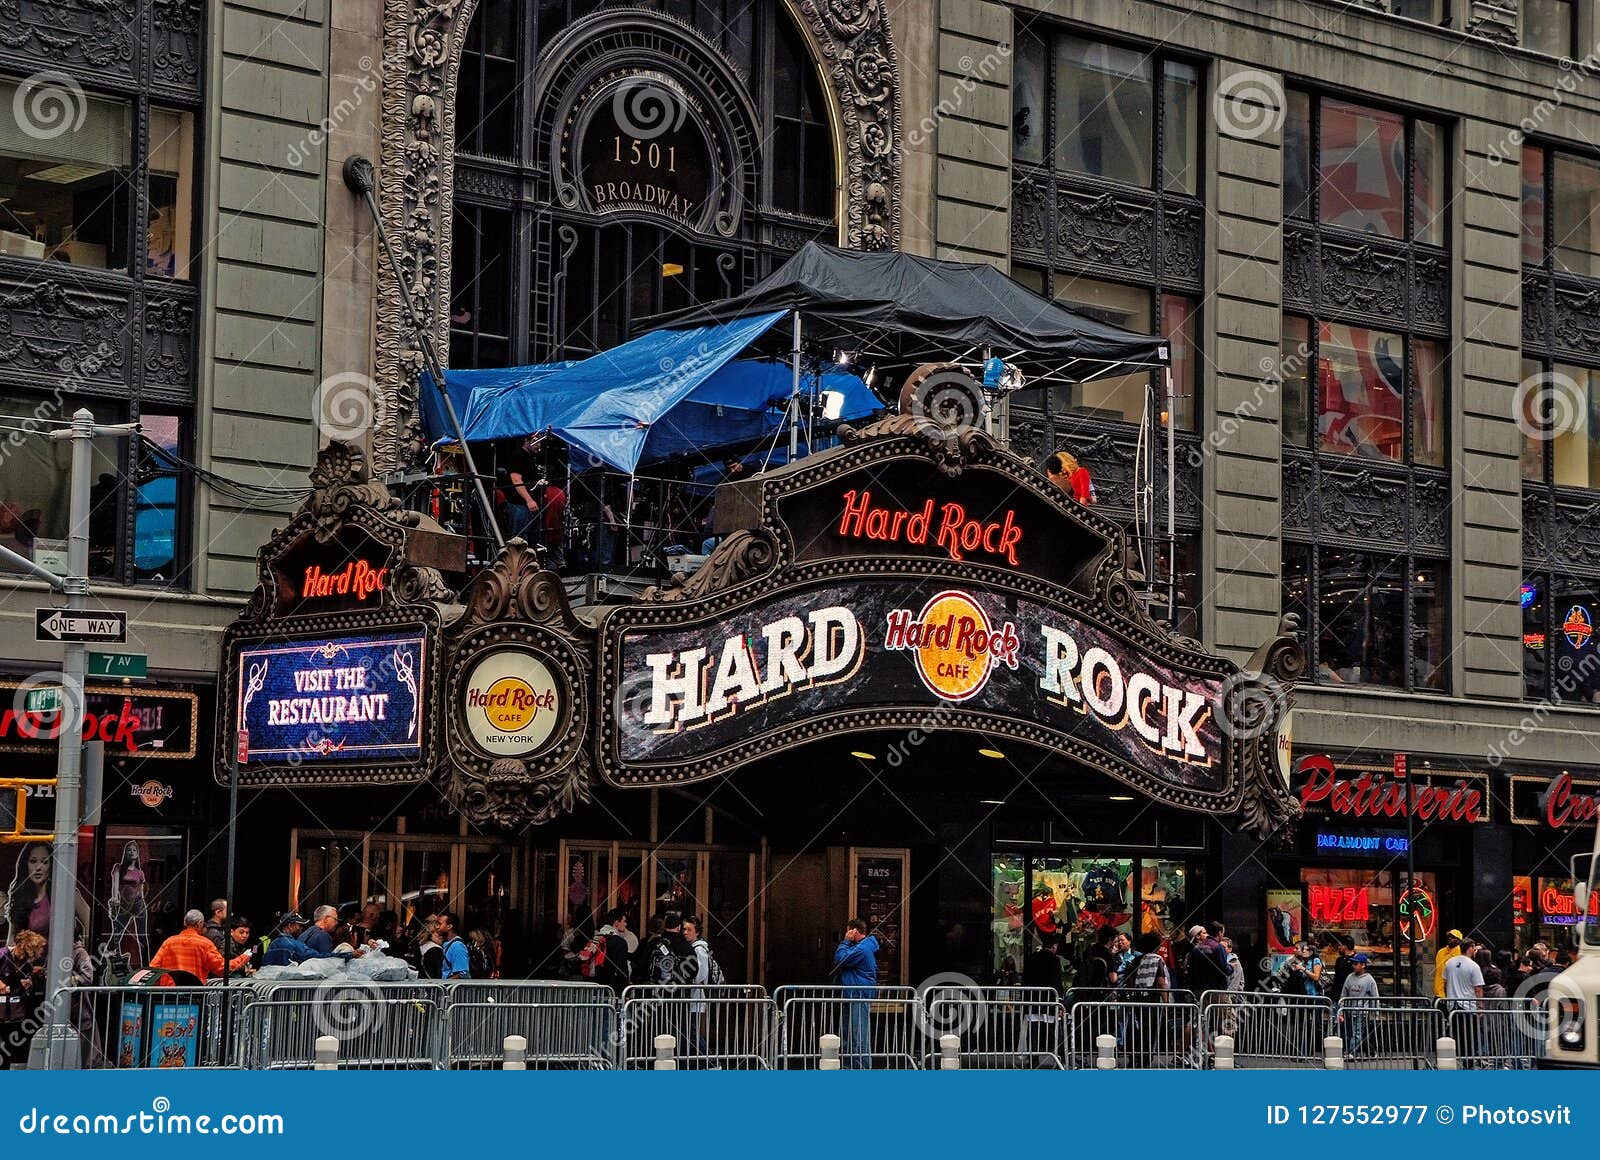 Hard Rock Cafe In New York Usa Editorial Photography Image Of Music Eating